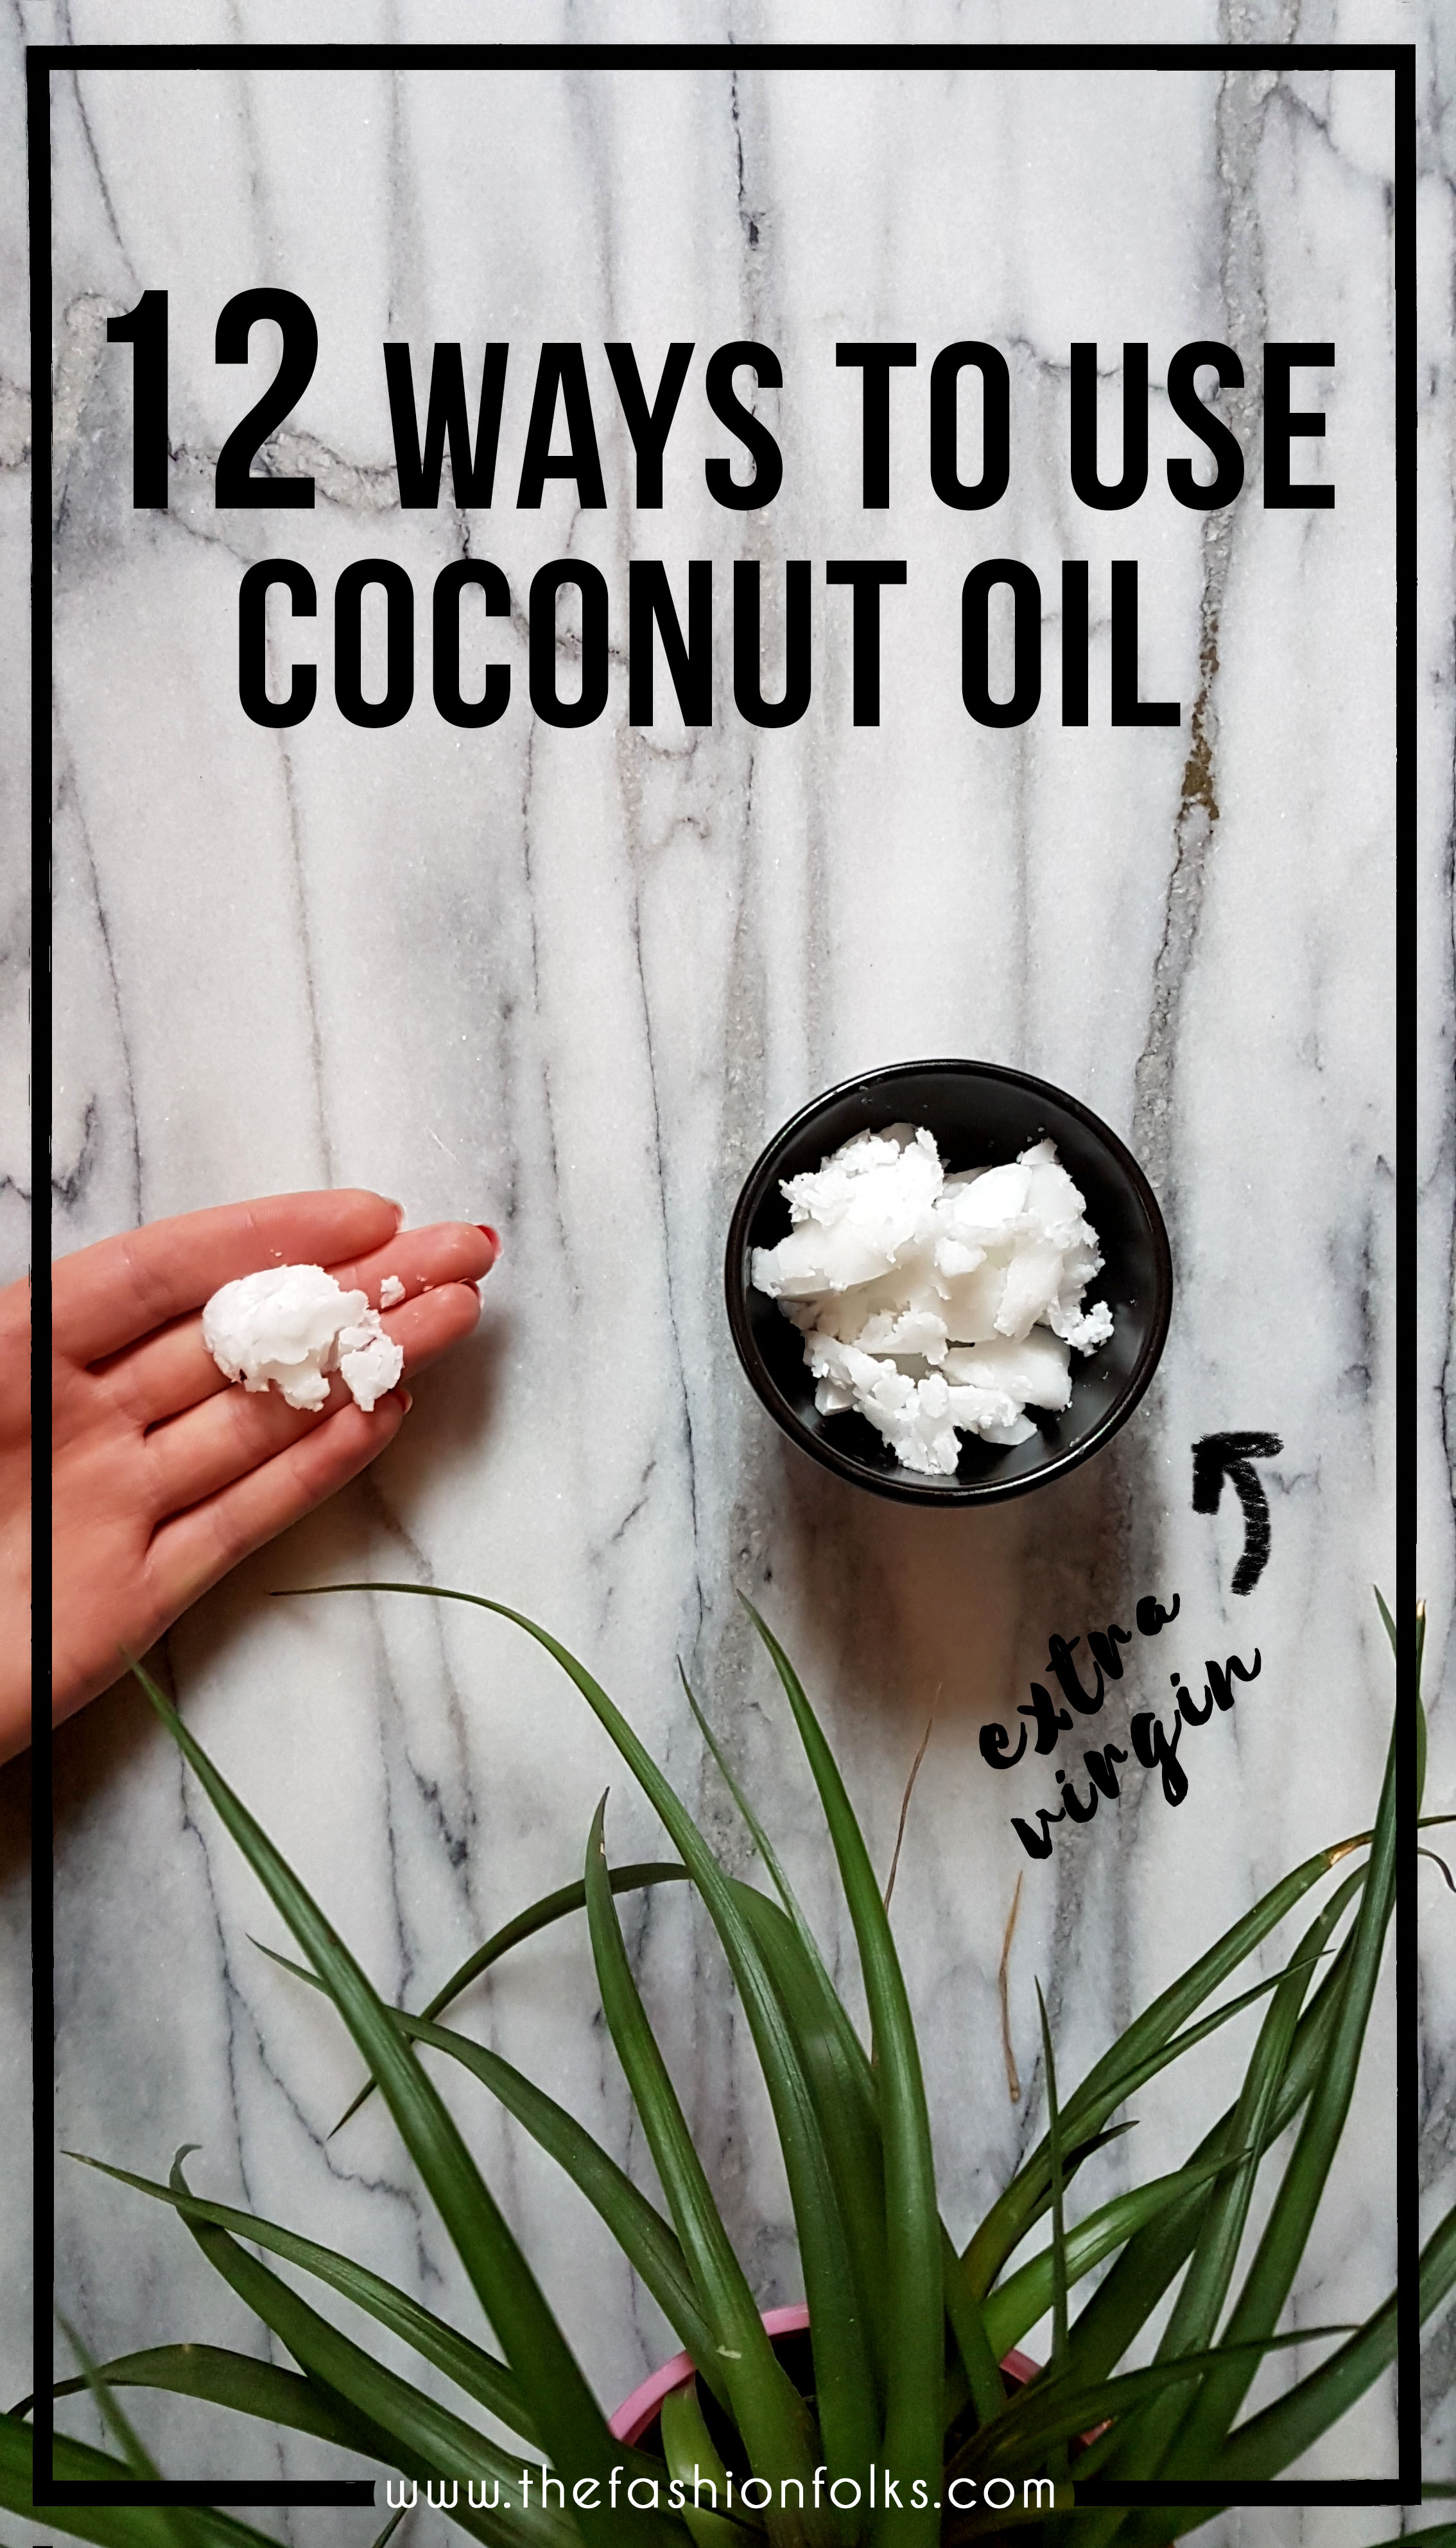 12 Ways To Use Coconut Oil | The Fashion Folks